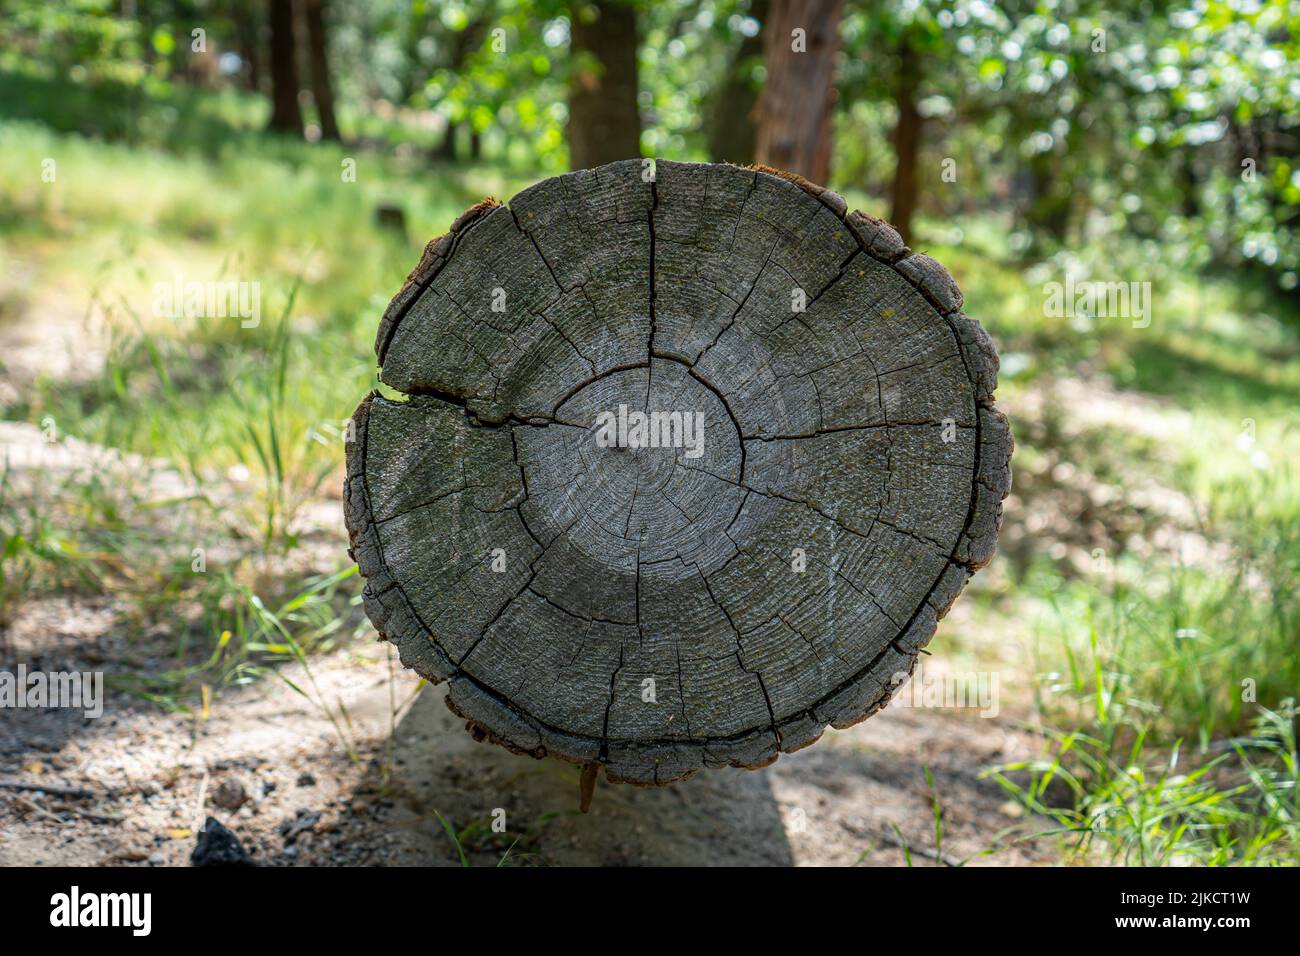 Trees and woods, Big Bear, pine crest Stock Photo